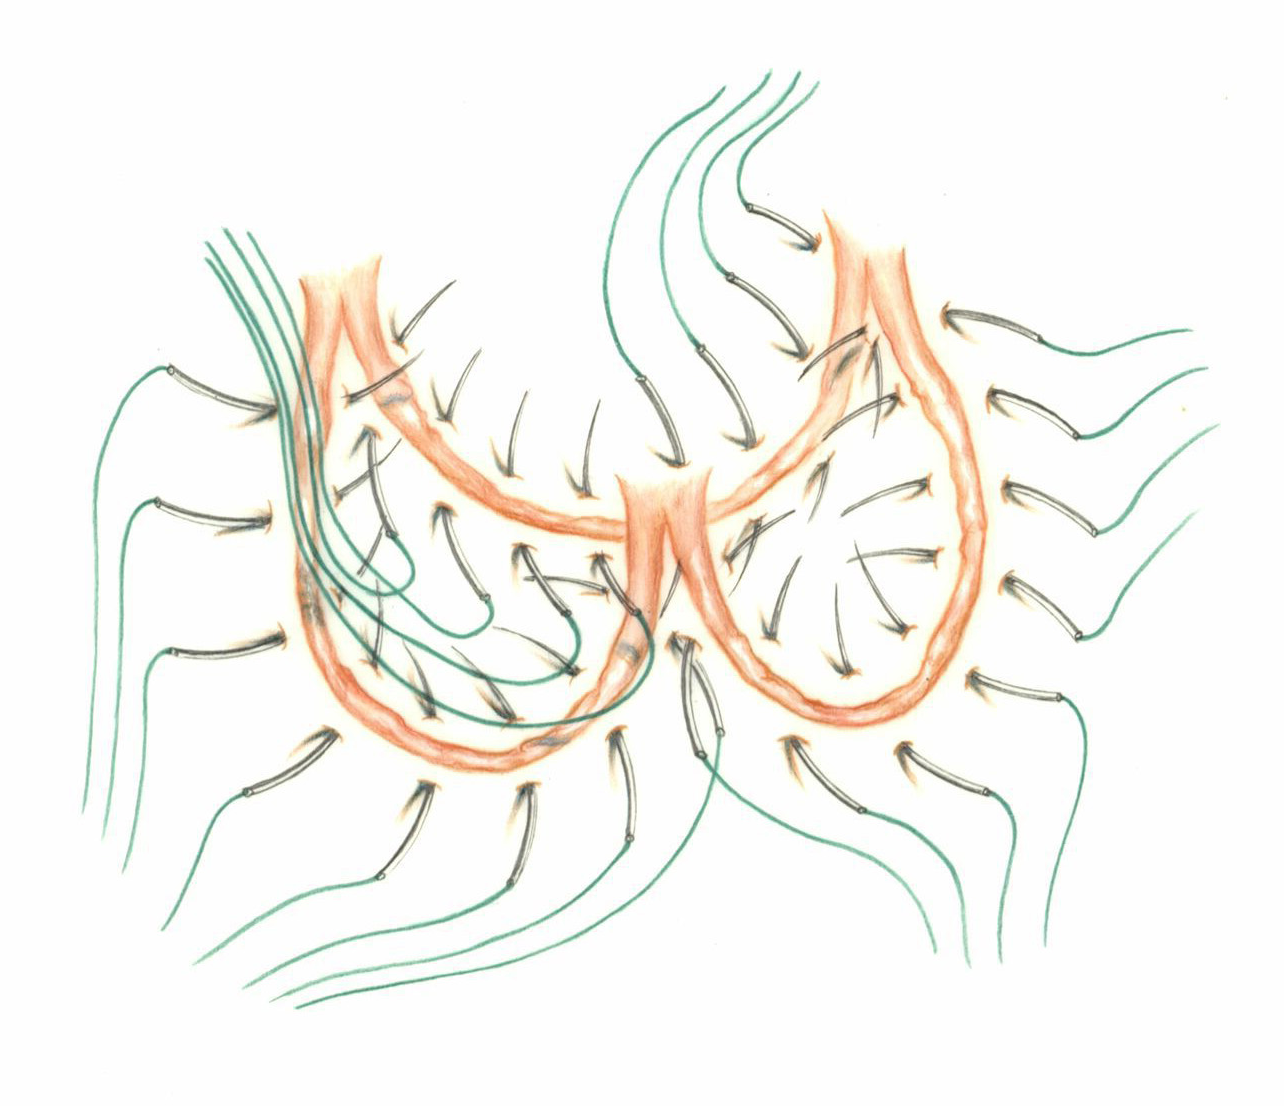 Color illustration demonstrates how to sew standard sutures for aortic valve replacement